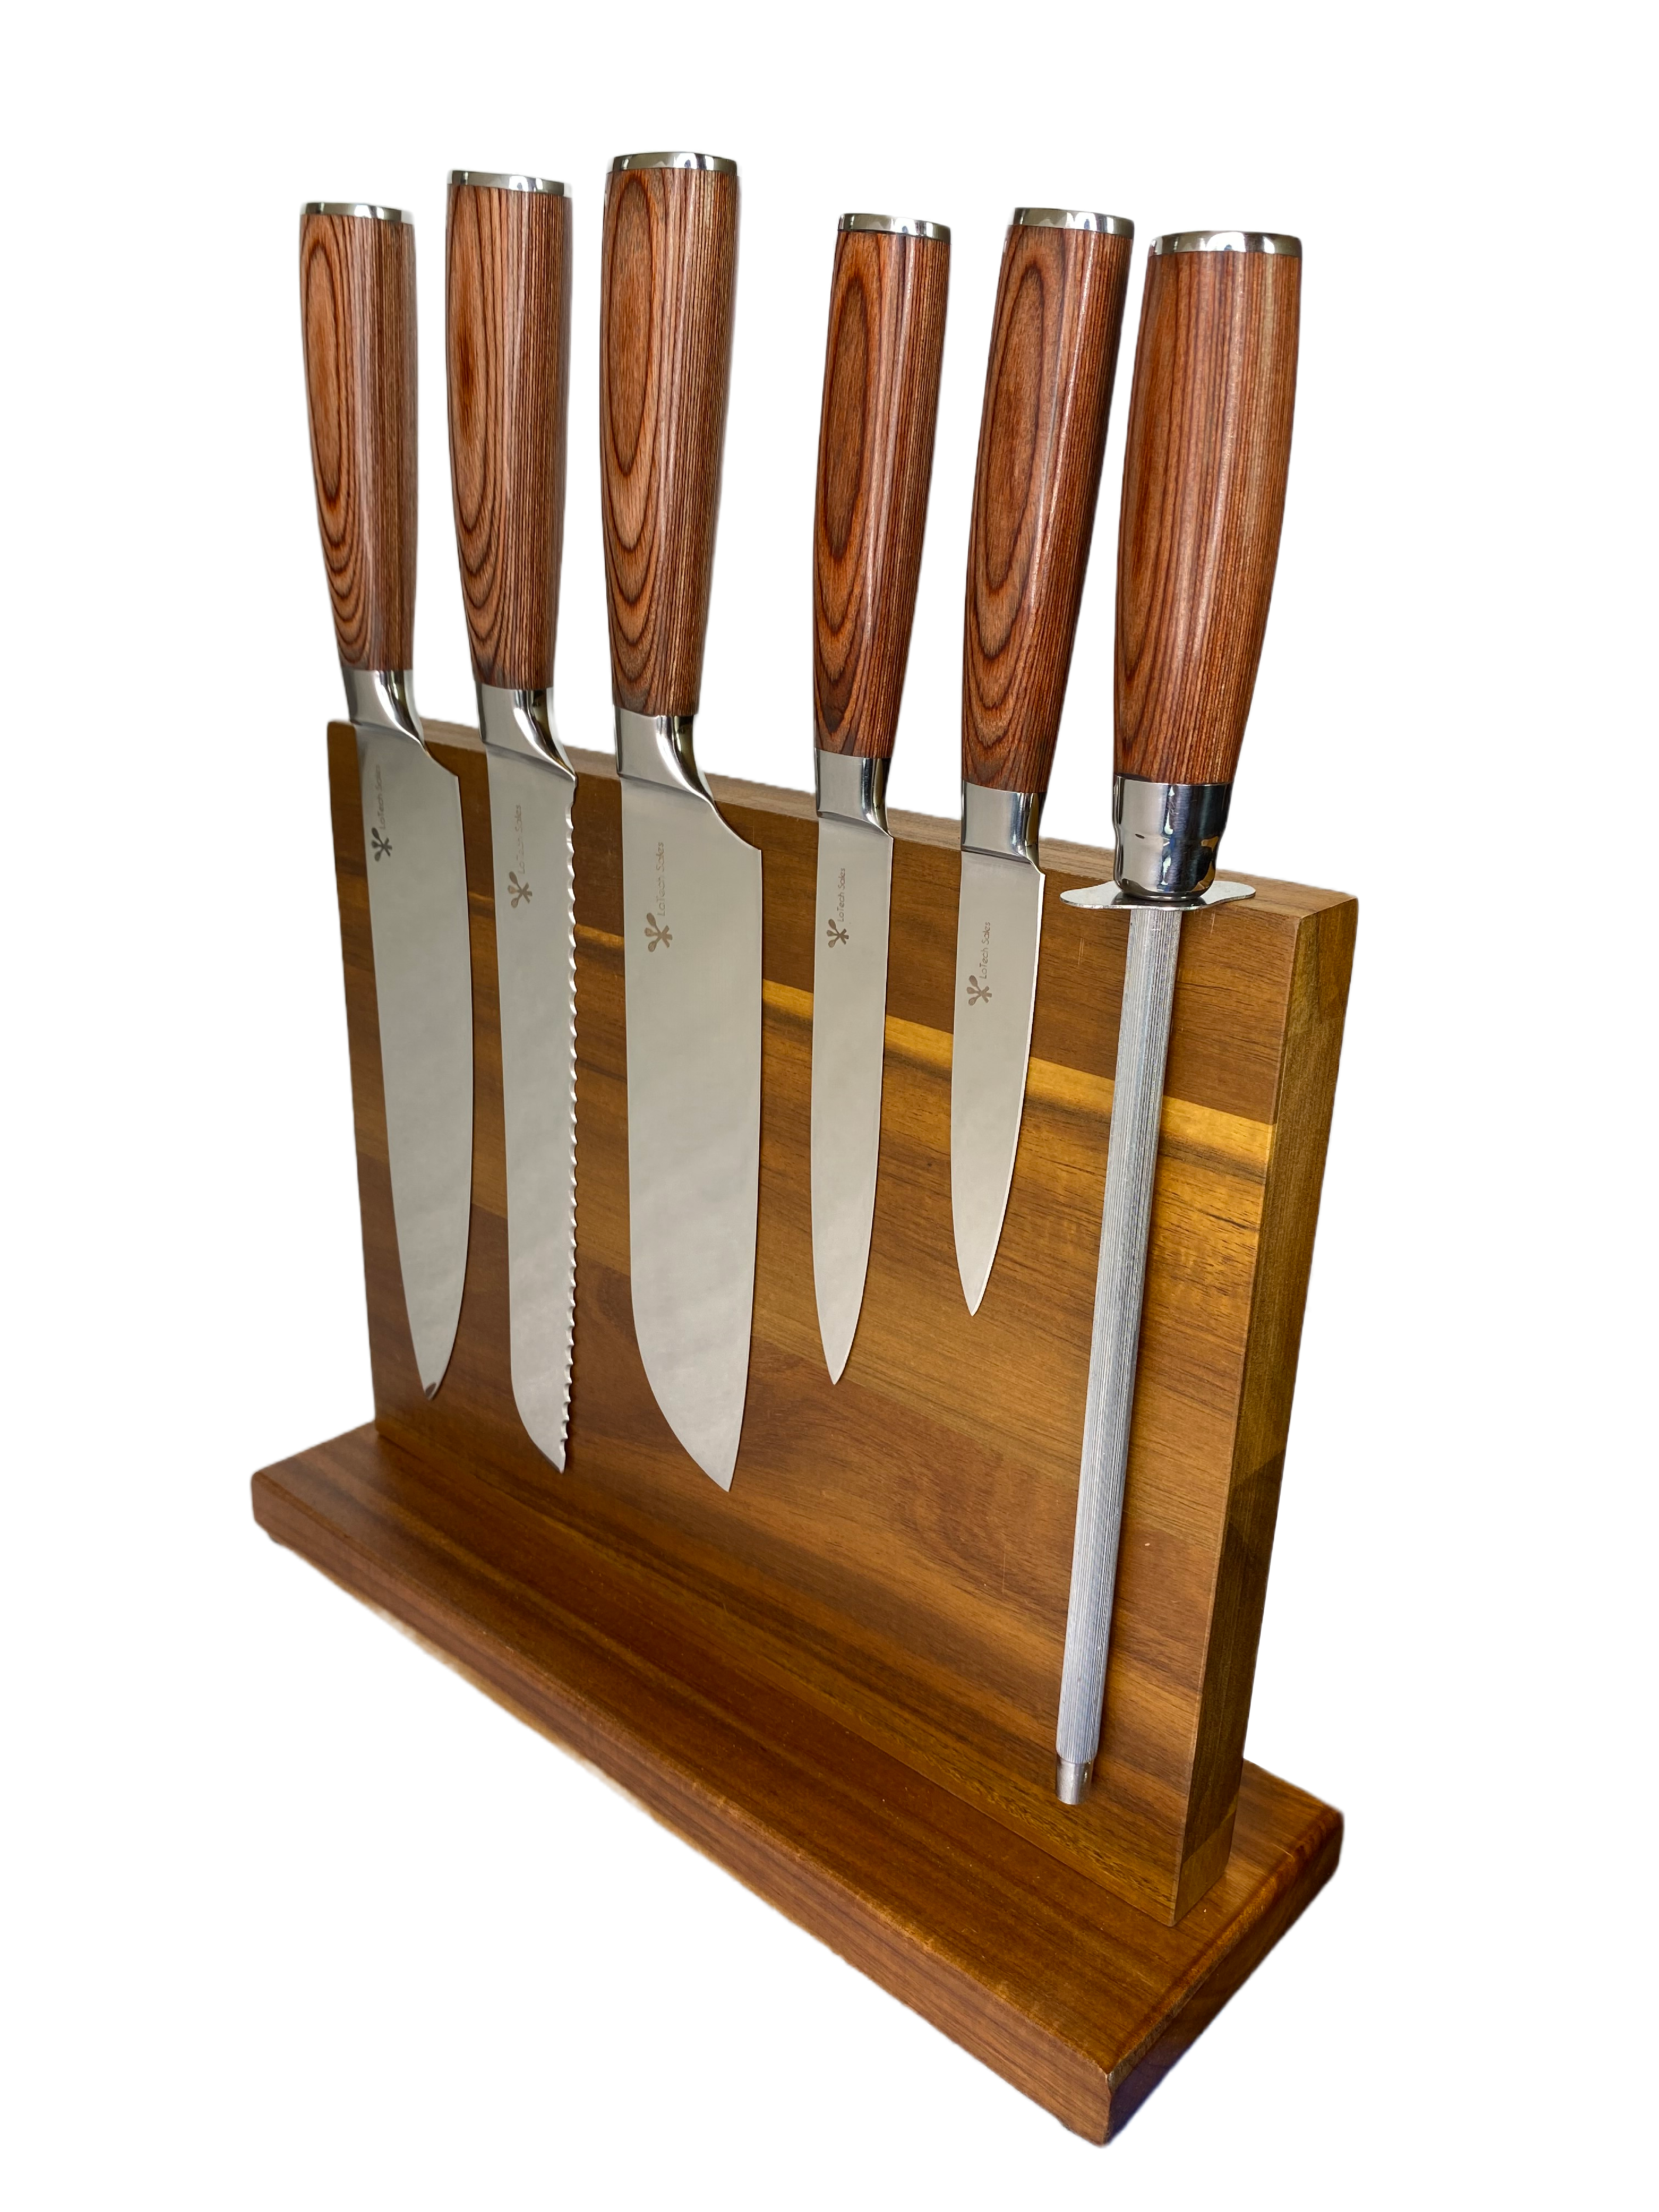 https://www.lotechsales.com/wp-content/uploads/2023/01/knife-set-angle.png